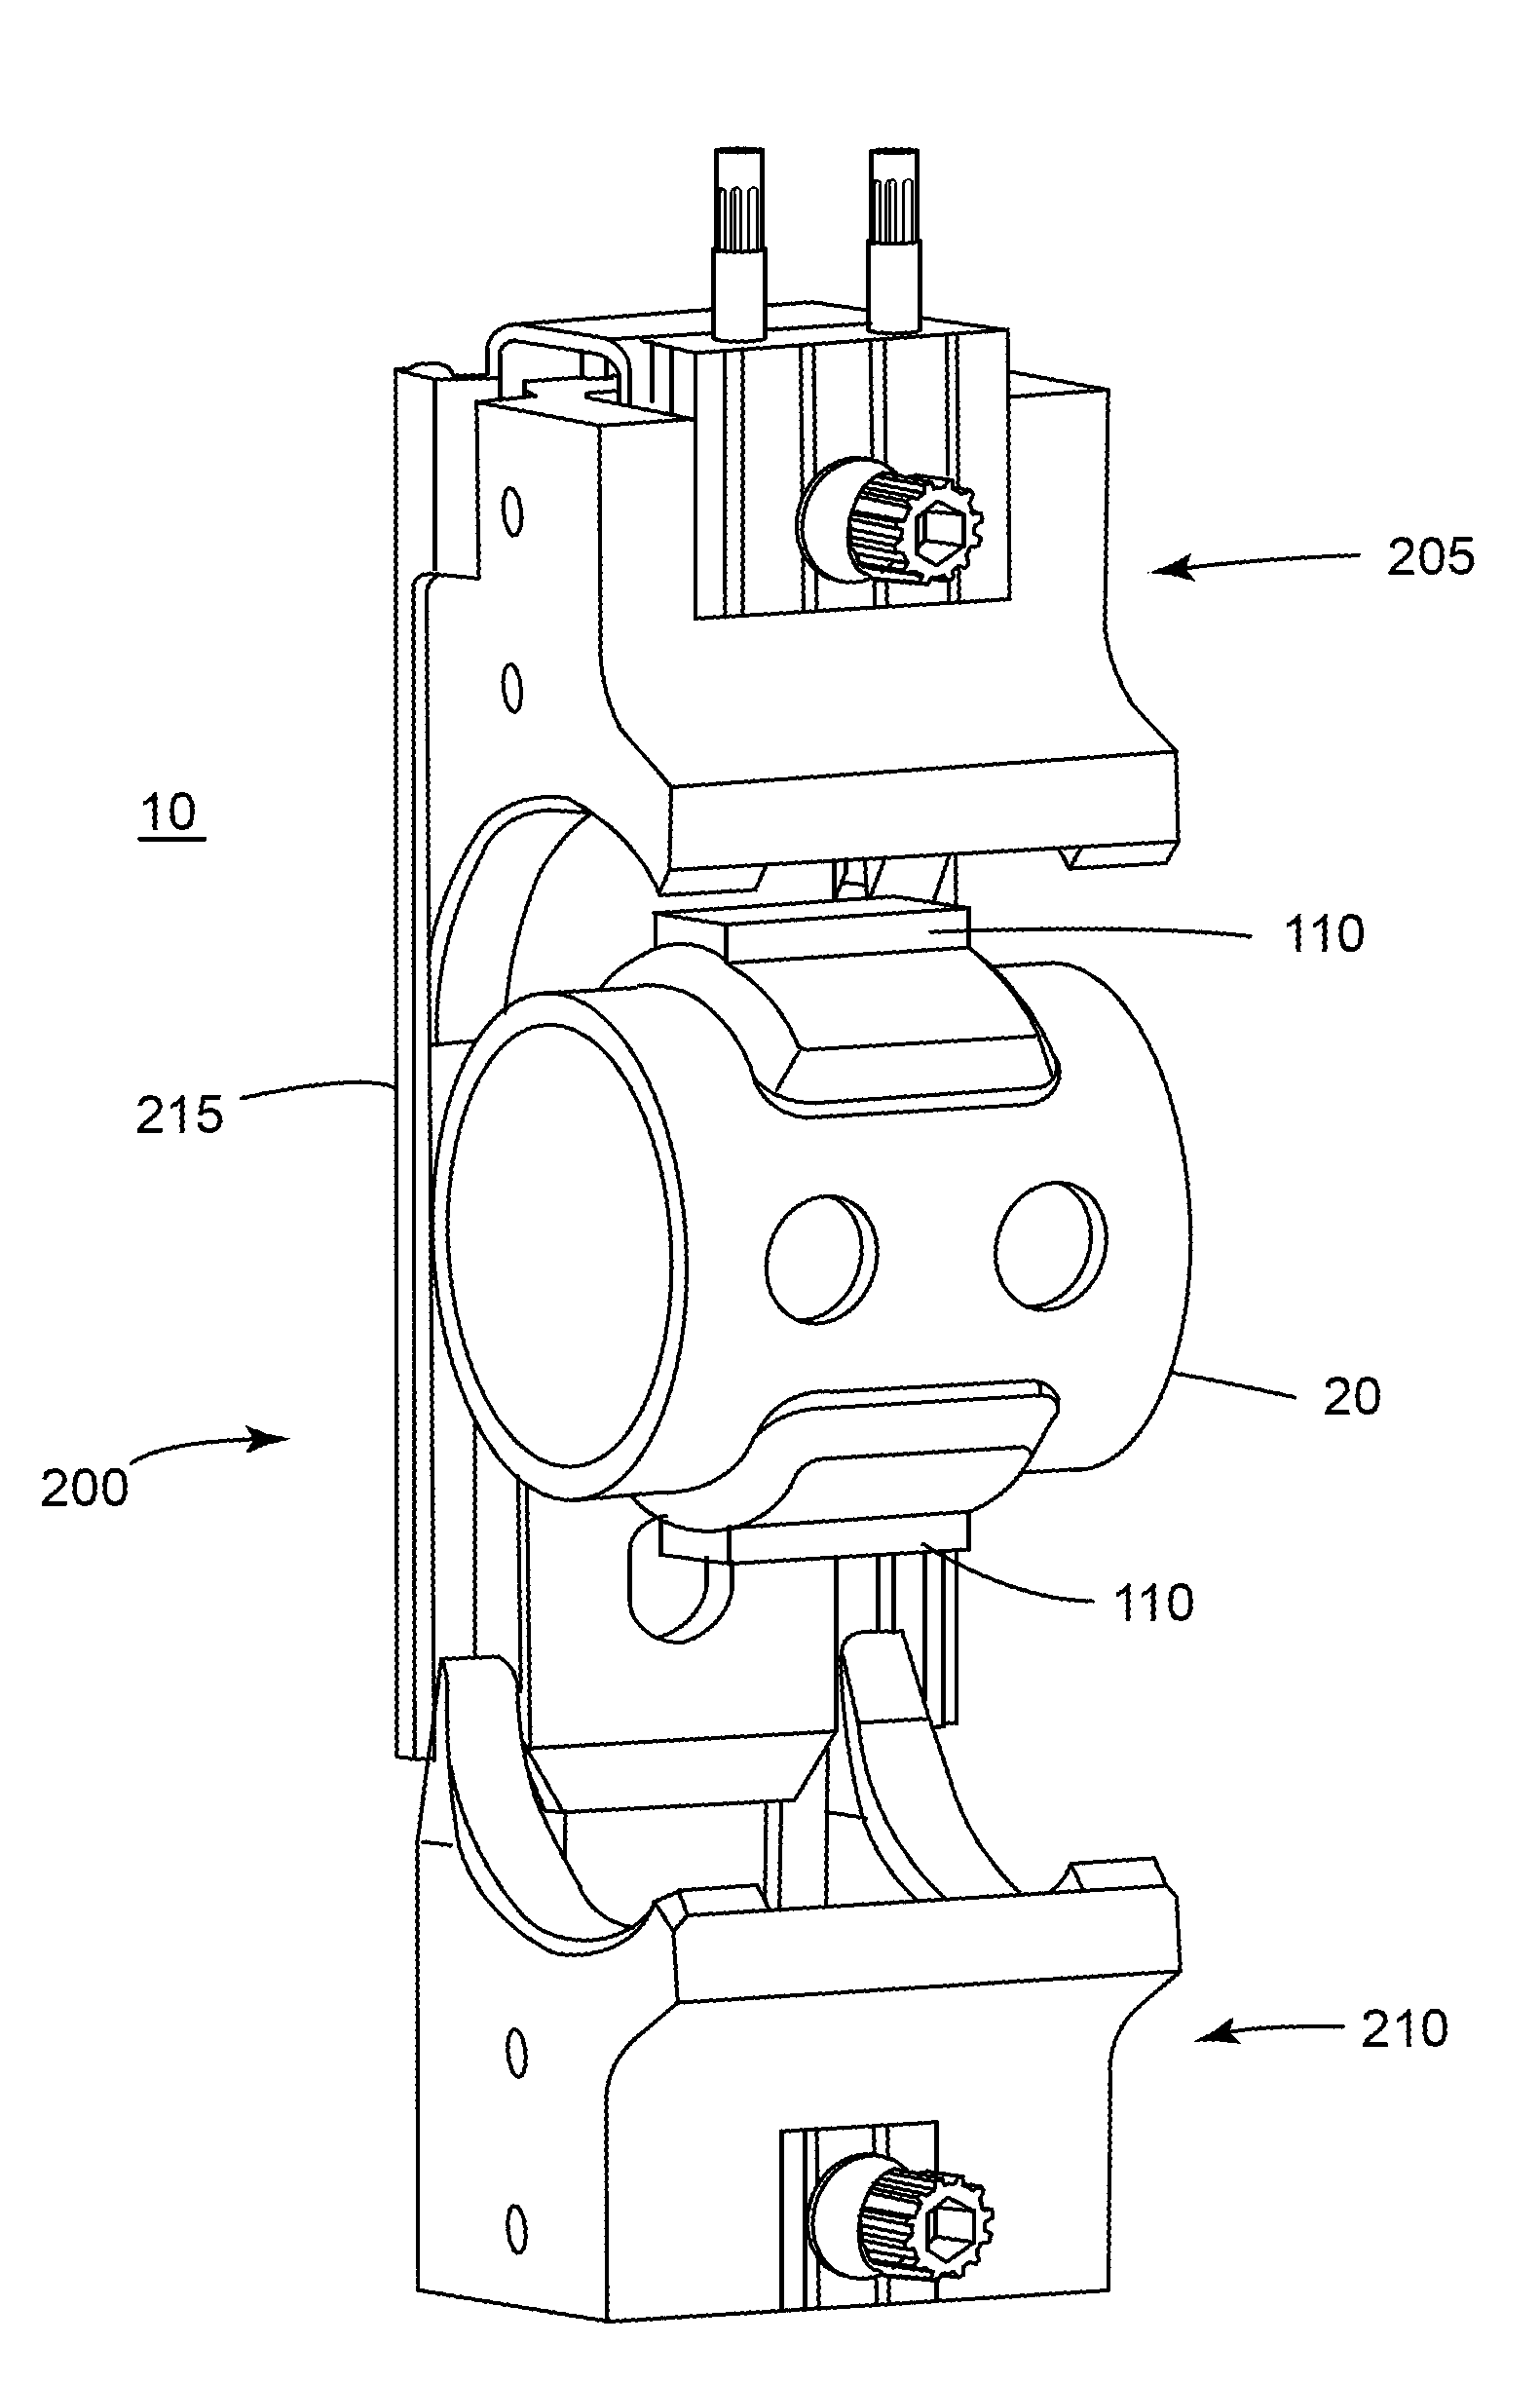 Apparatus and system for dampening the vibration experienced by an object